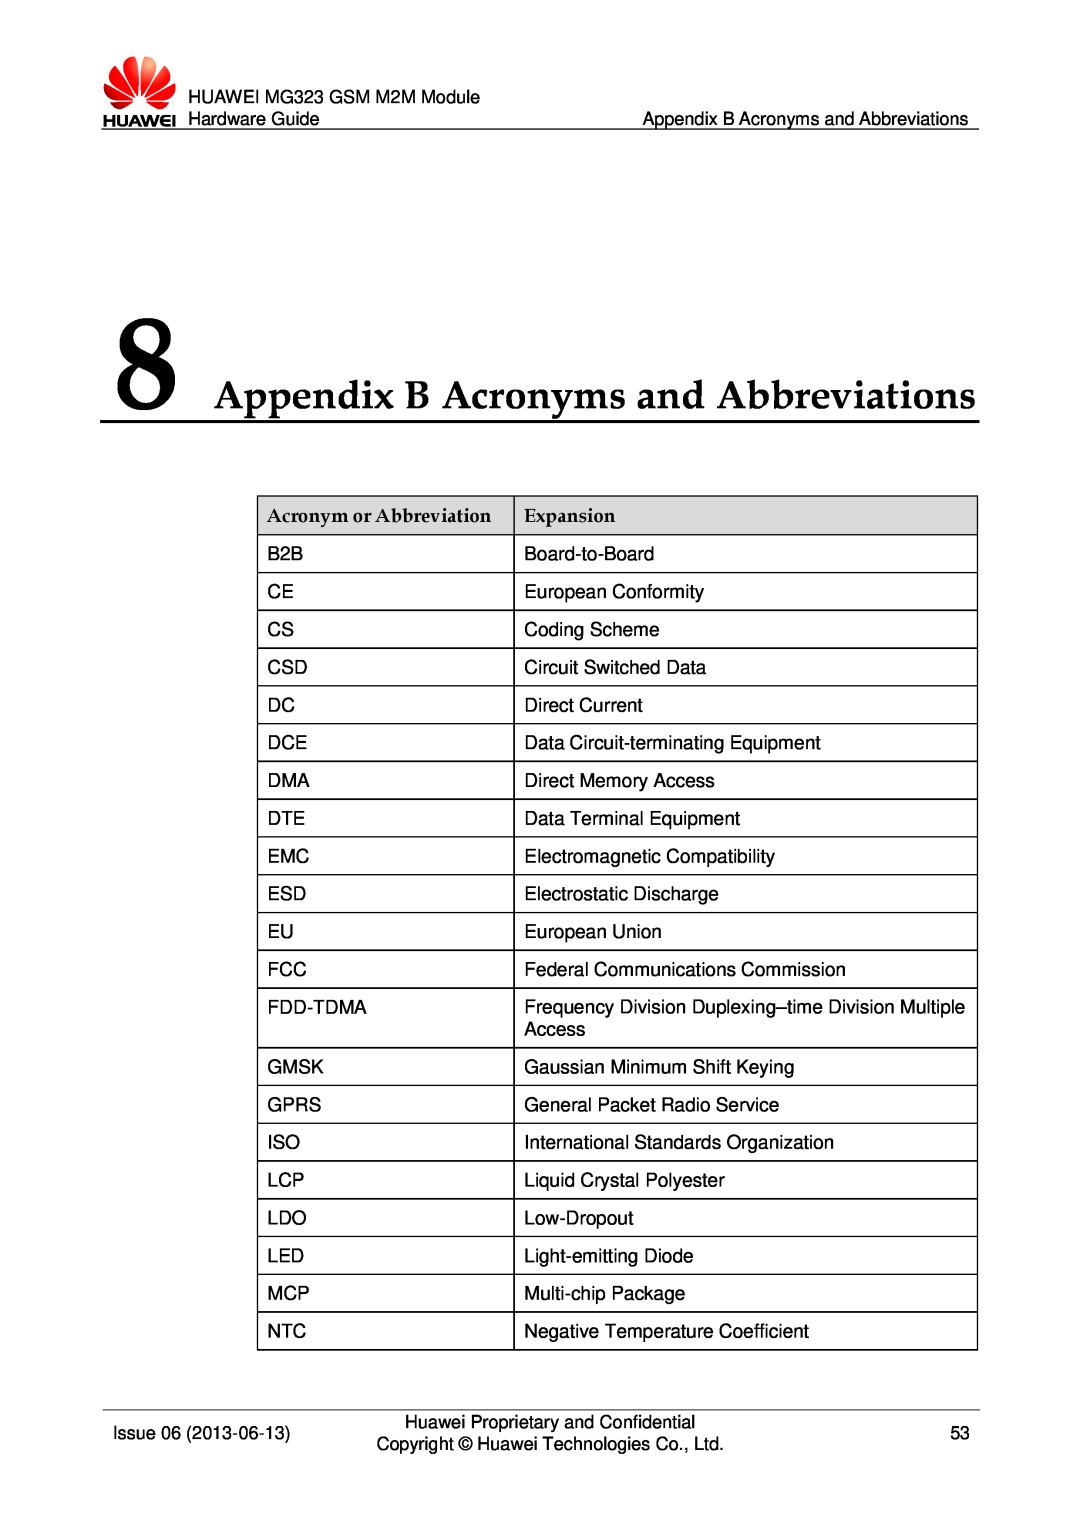 Huawei MG323 manual Appendix B Acronyms and Abbreviations, Acronym or Abbreviation, Expansion 